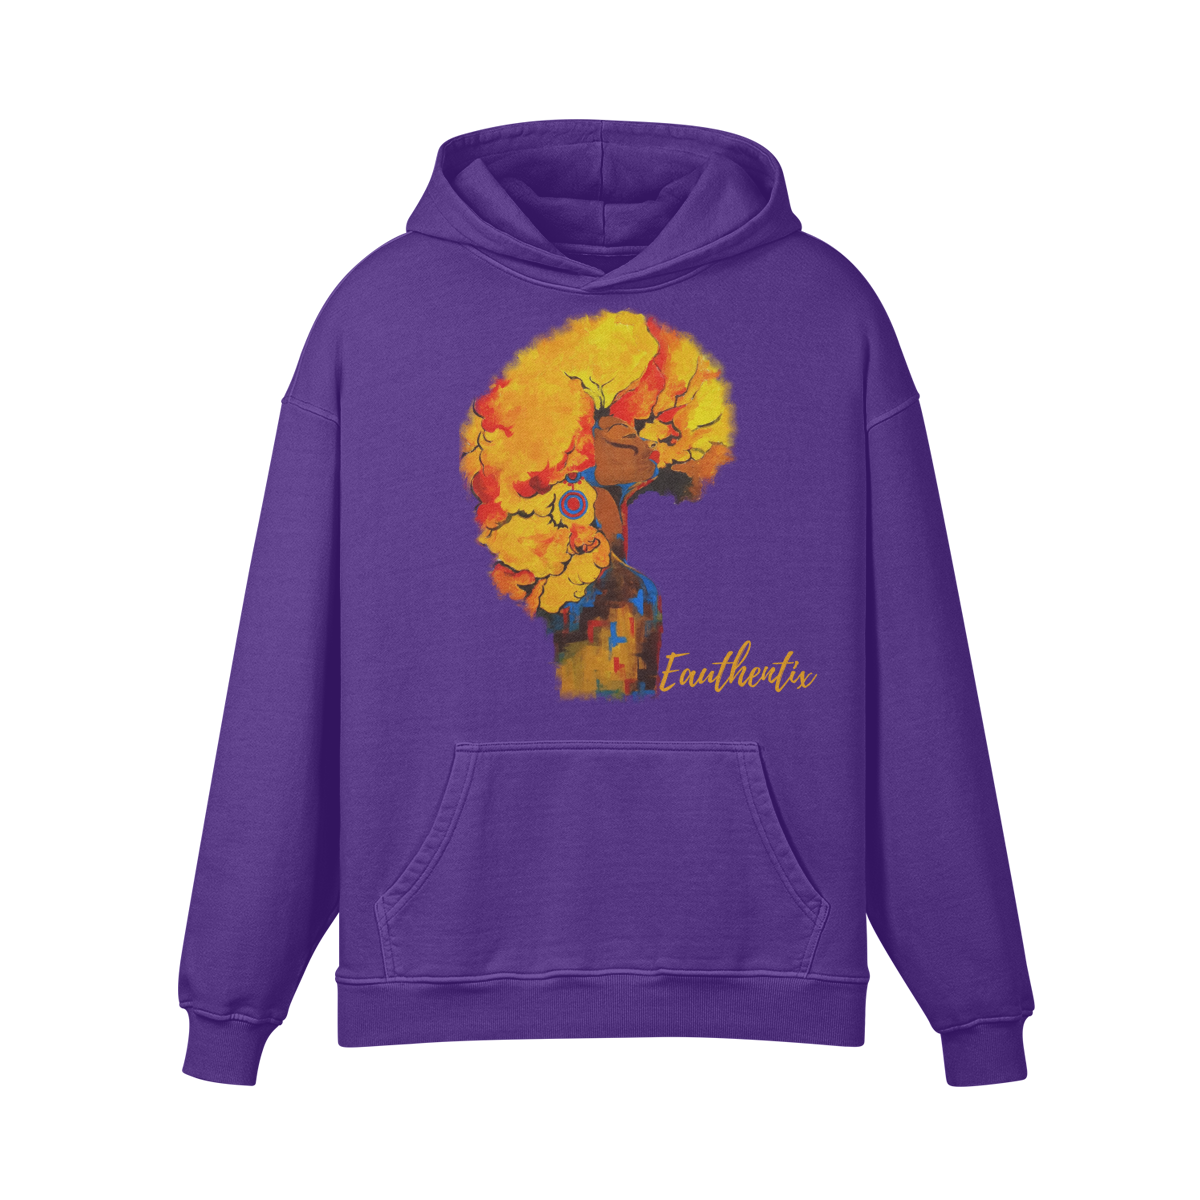 Woman Of the World Hoodie PODpartner